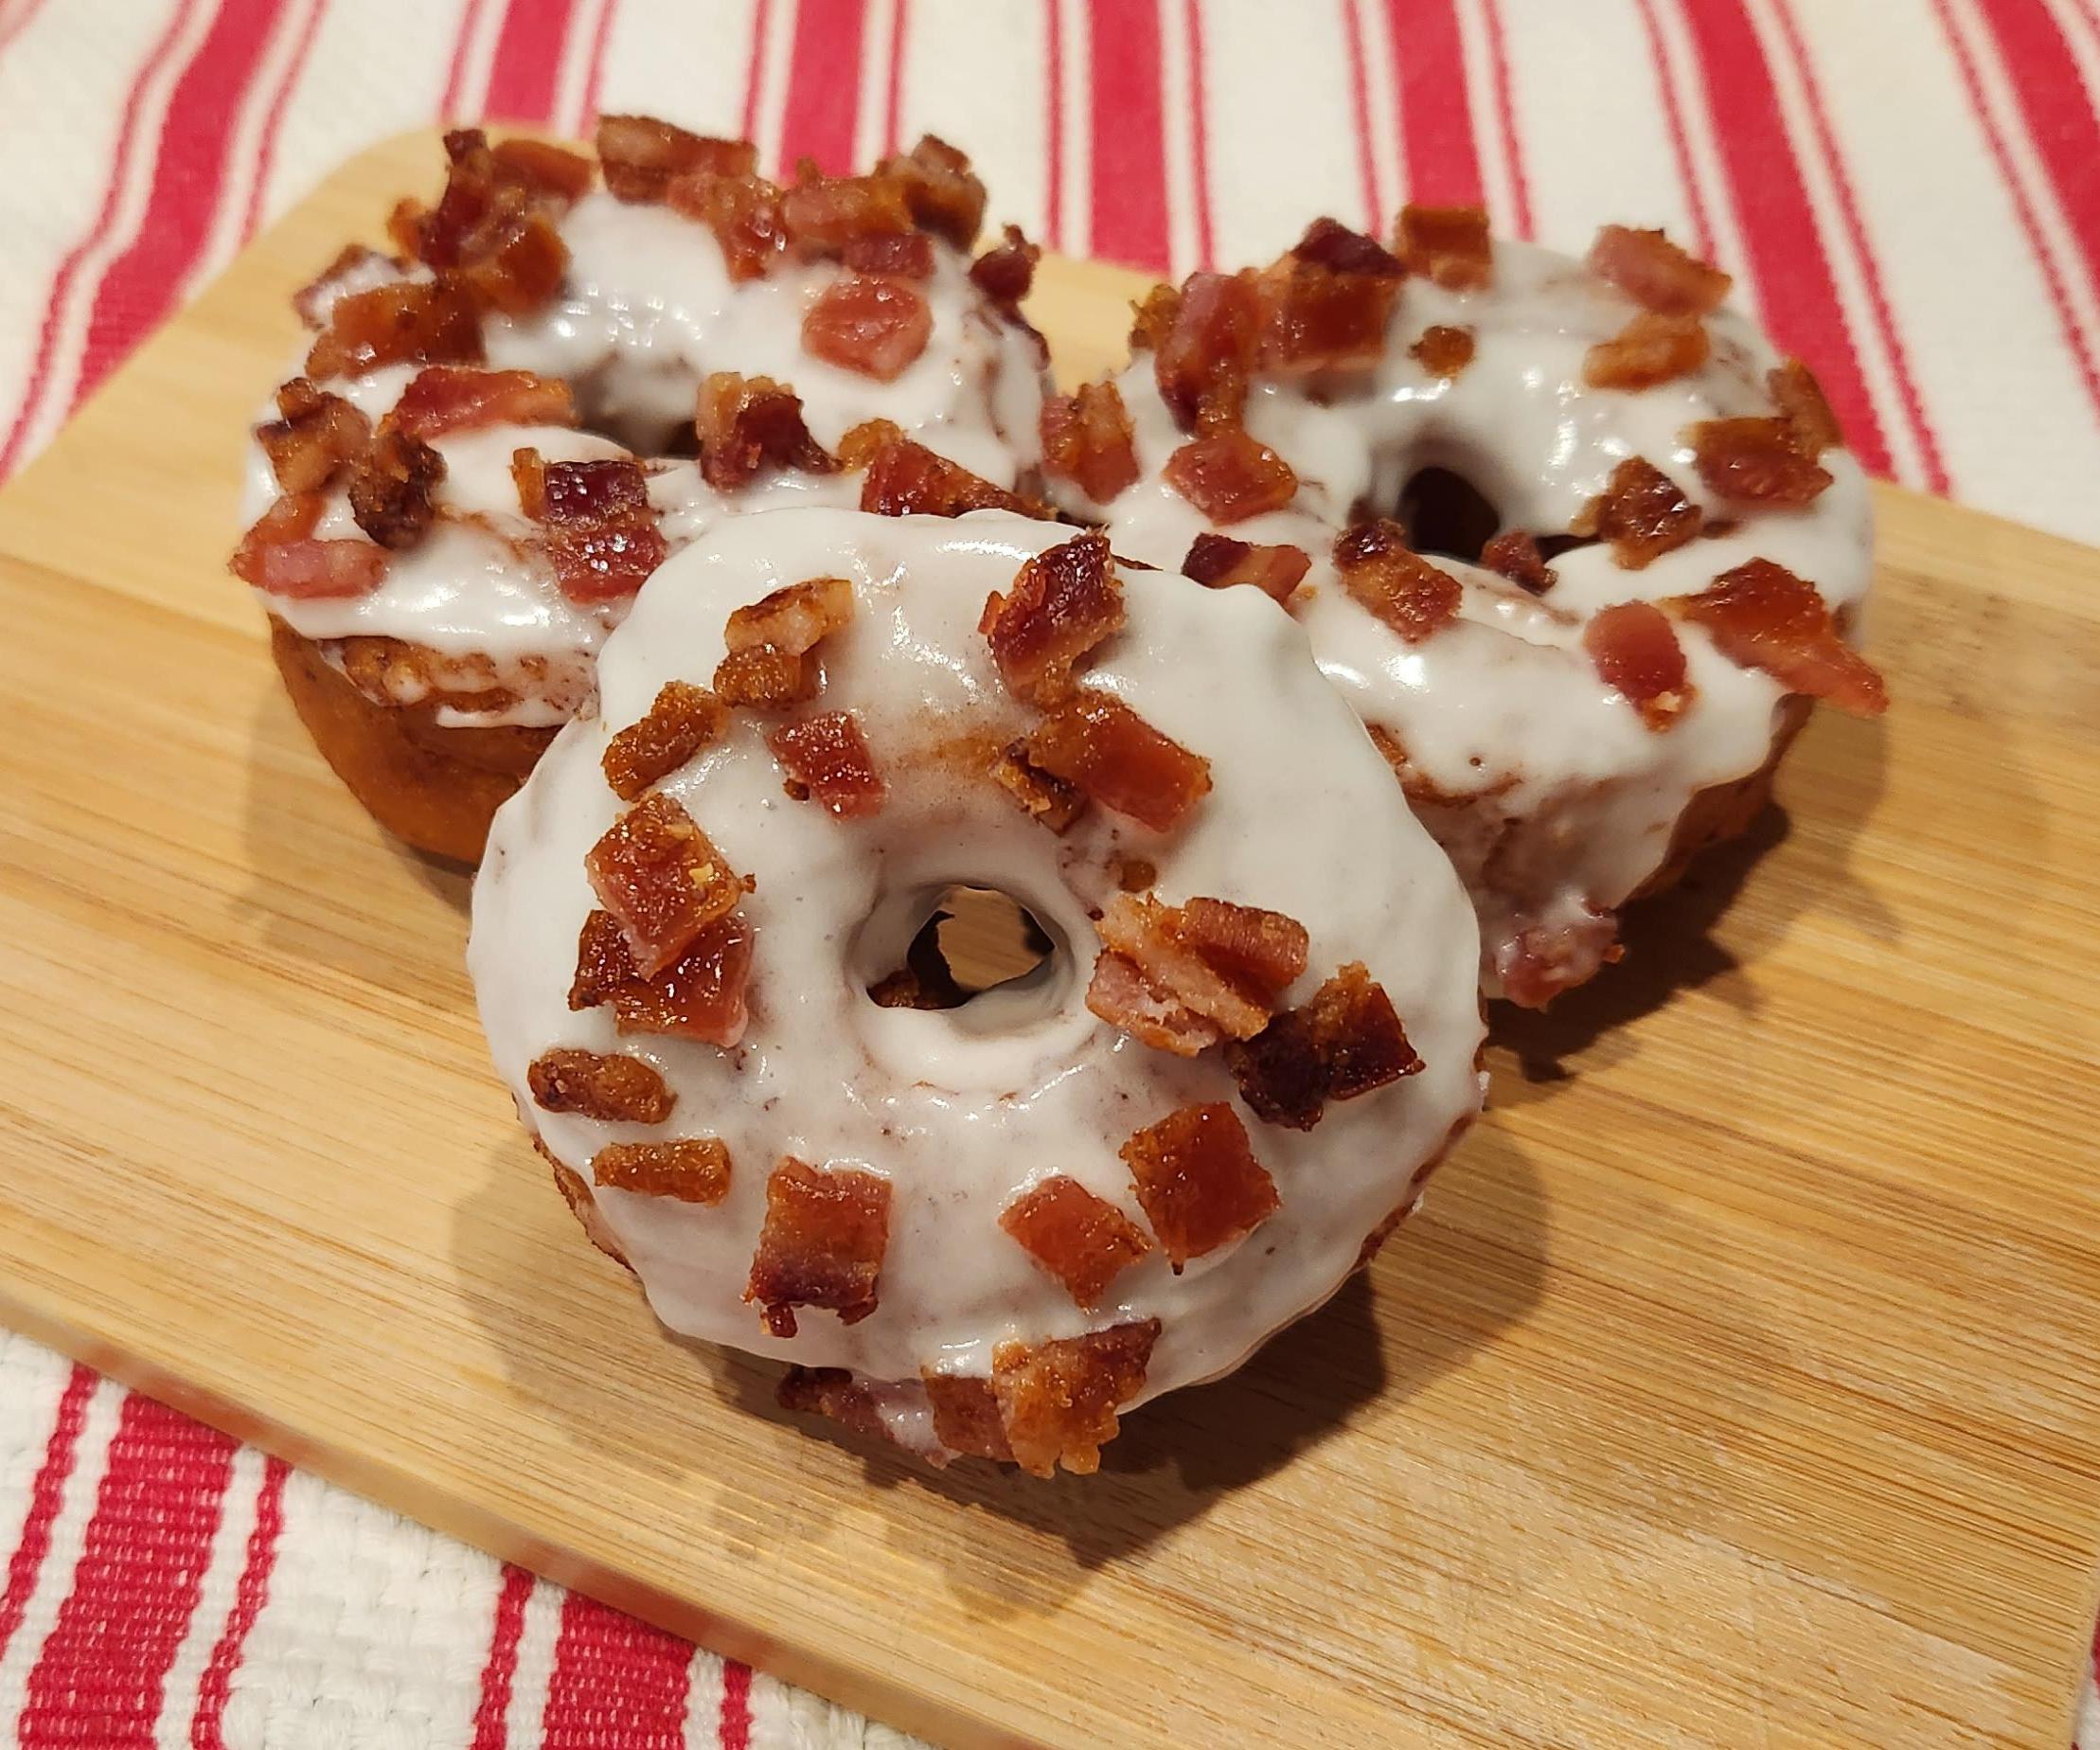 Sinful Cinnamon Roll Candied Bacon Doughnuts